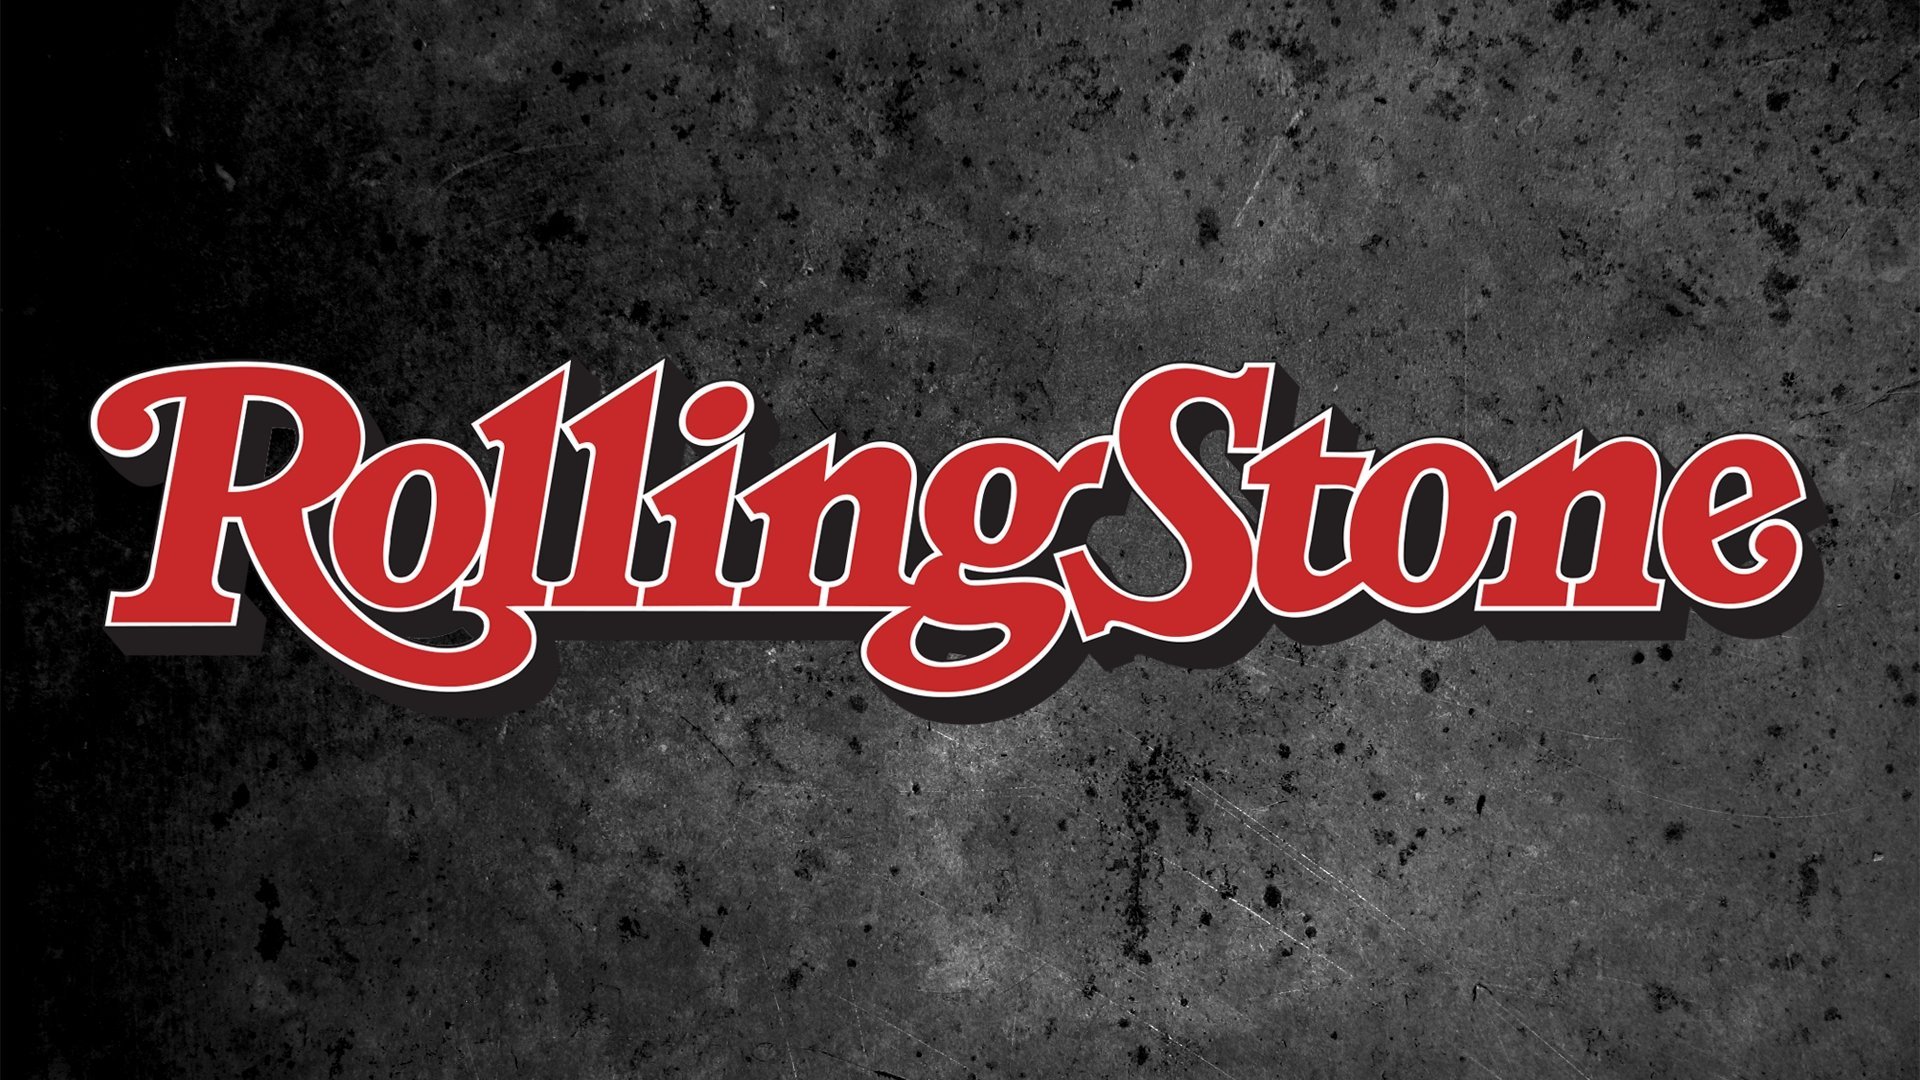 The Iconic Rolling Stone Magazine Is Up For Sale - Rolling Stone - HD Wallpaper 